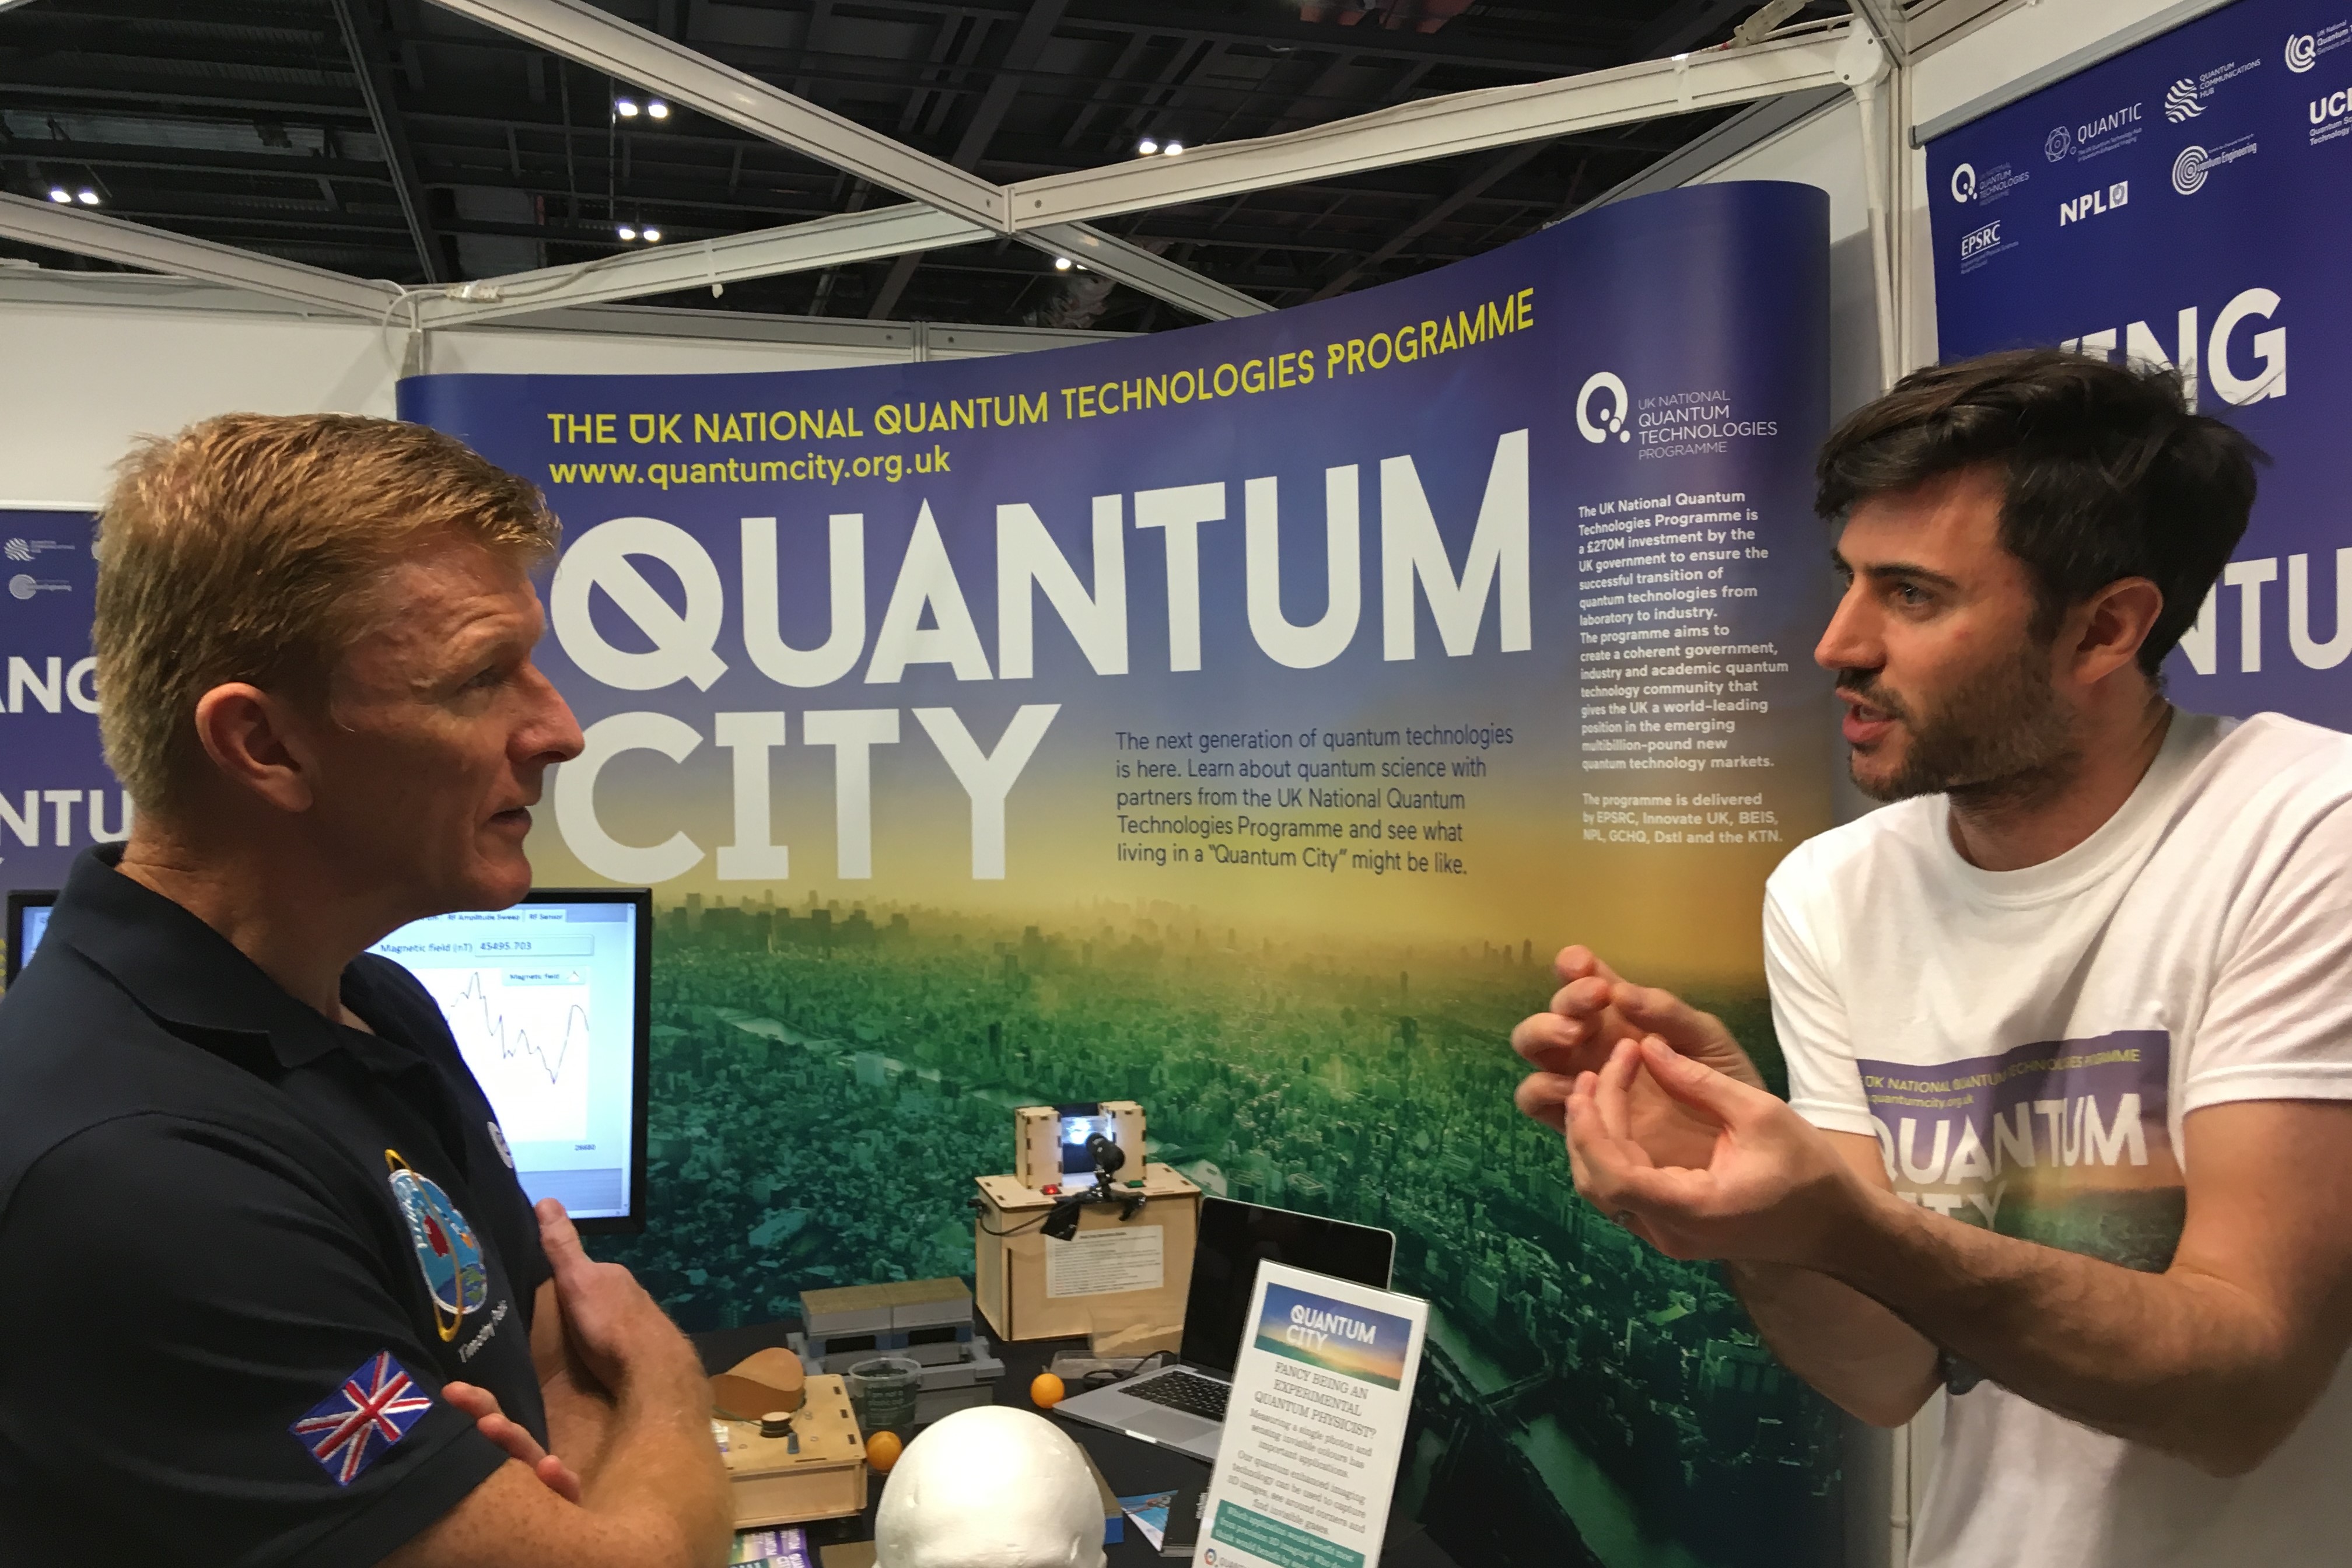 British Astronaut Tim Peake engaging with researchers at the Quantum City stand